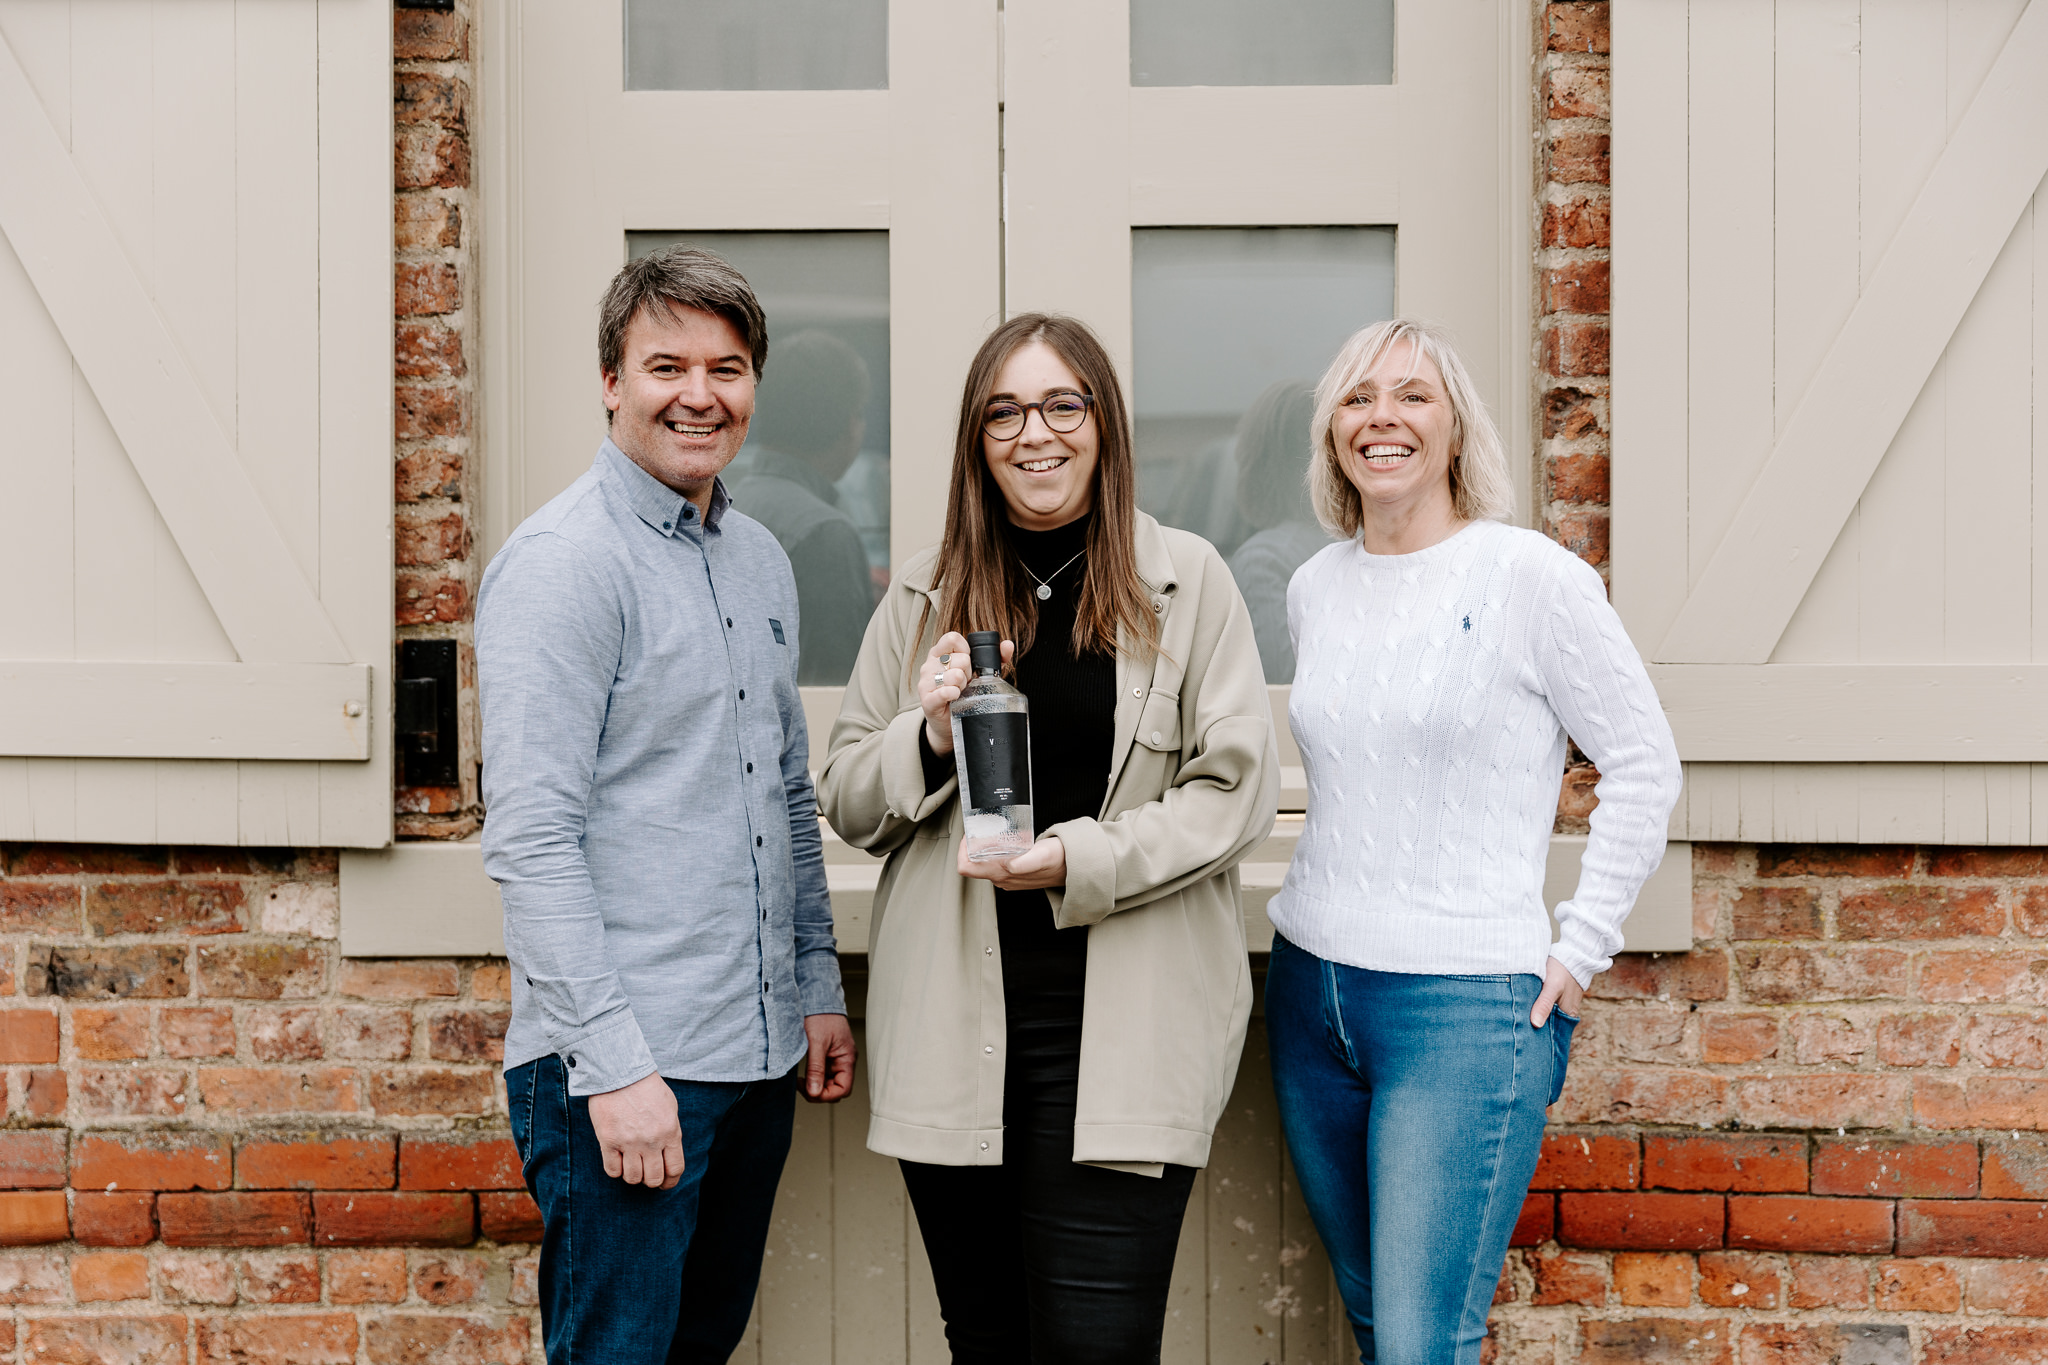 Teesside creative agency shortlisted in national awards